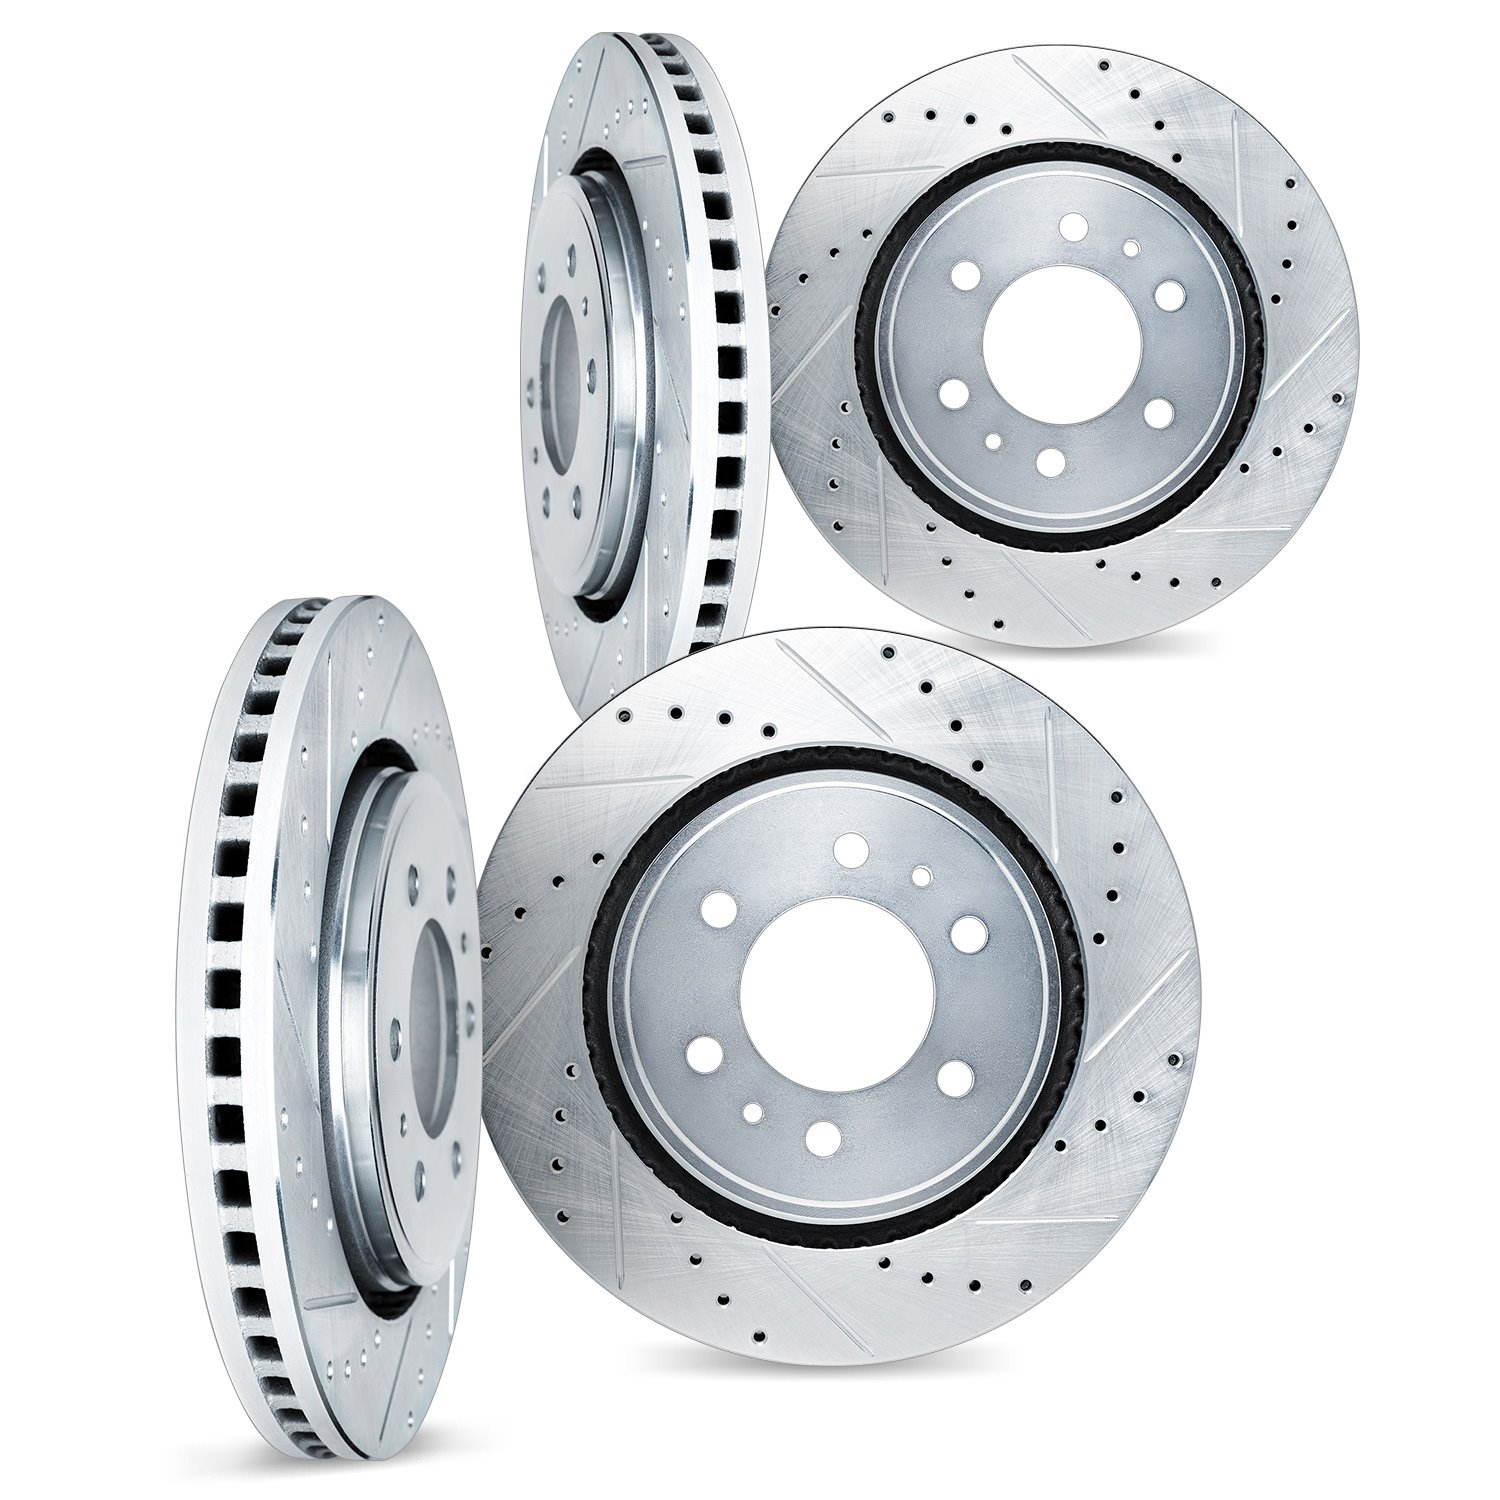 7004-54339 Drilled/Slotted Brake Rotors [Silver], Fits Select Ford/Lincoln/Mercury/Mazda, Position: Front and Rear